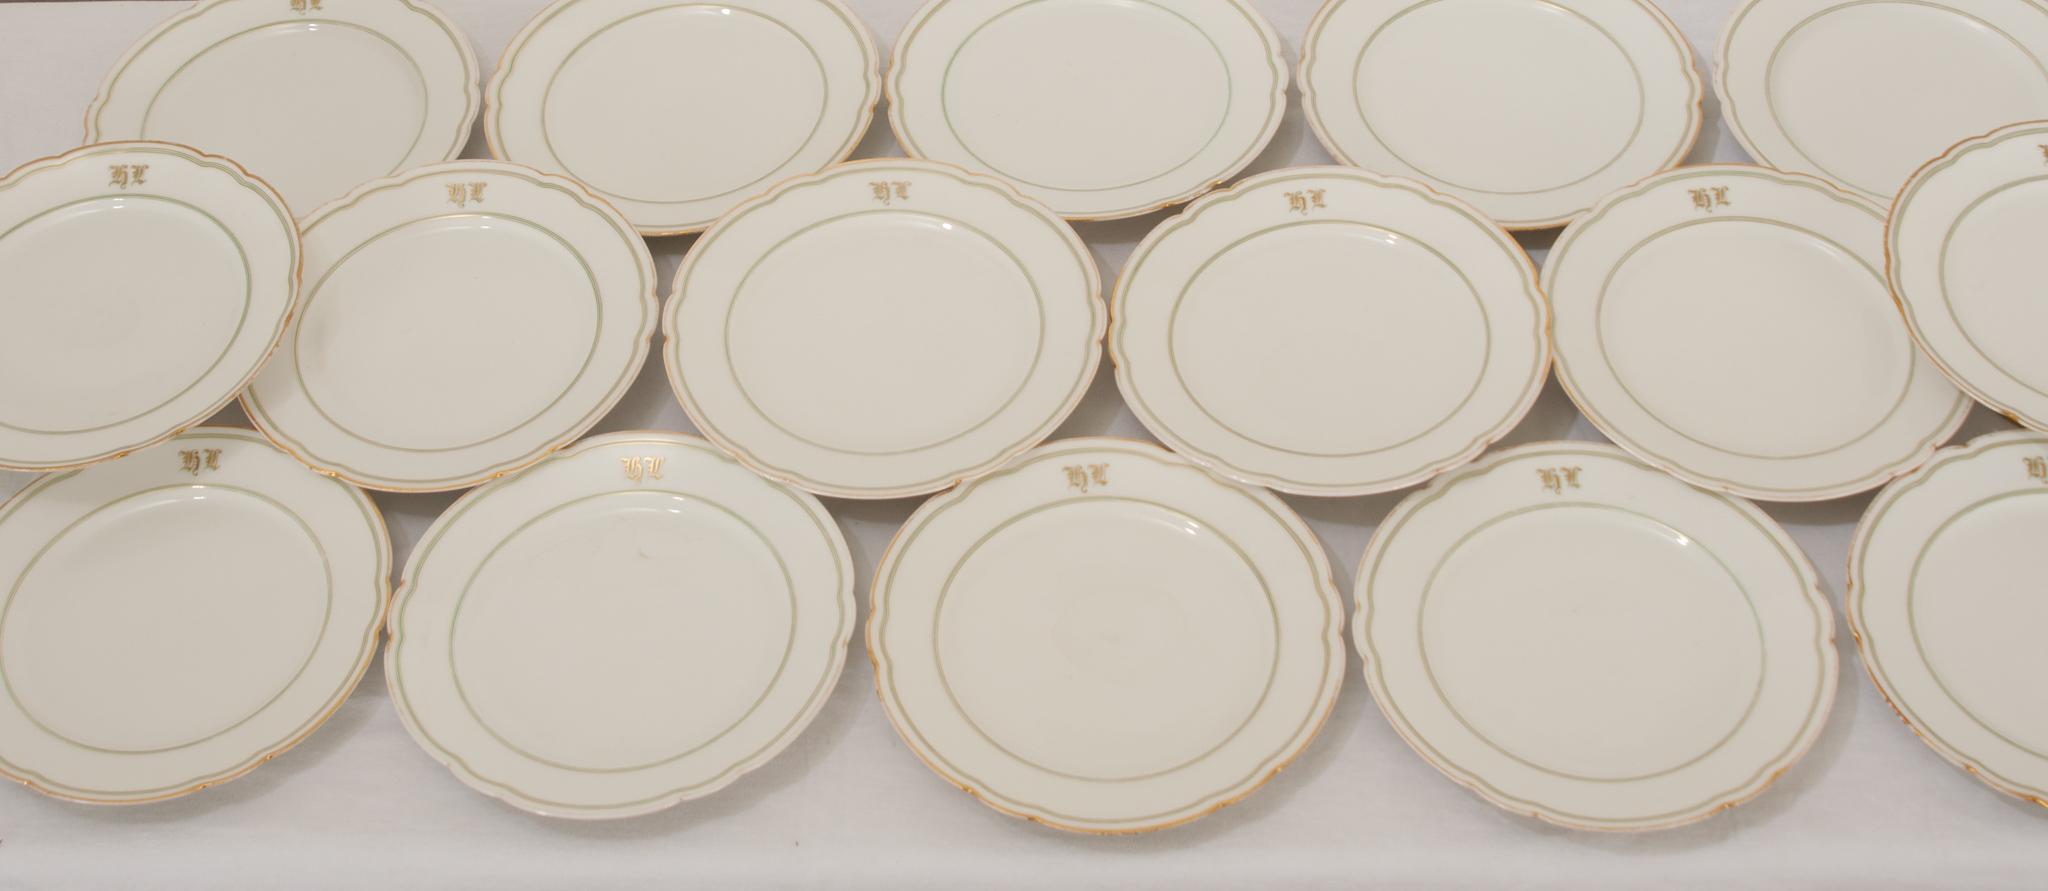 19th Century French Old Paris “KL” 16 Piece Service For Sale